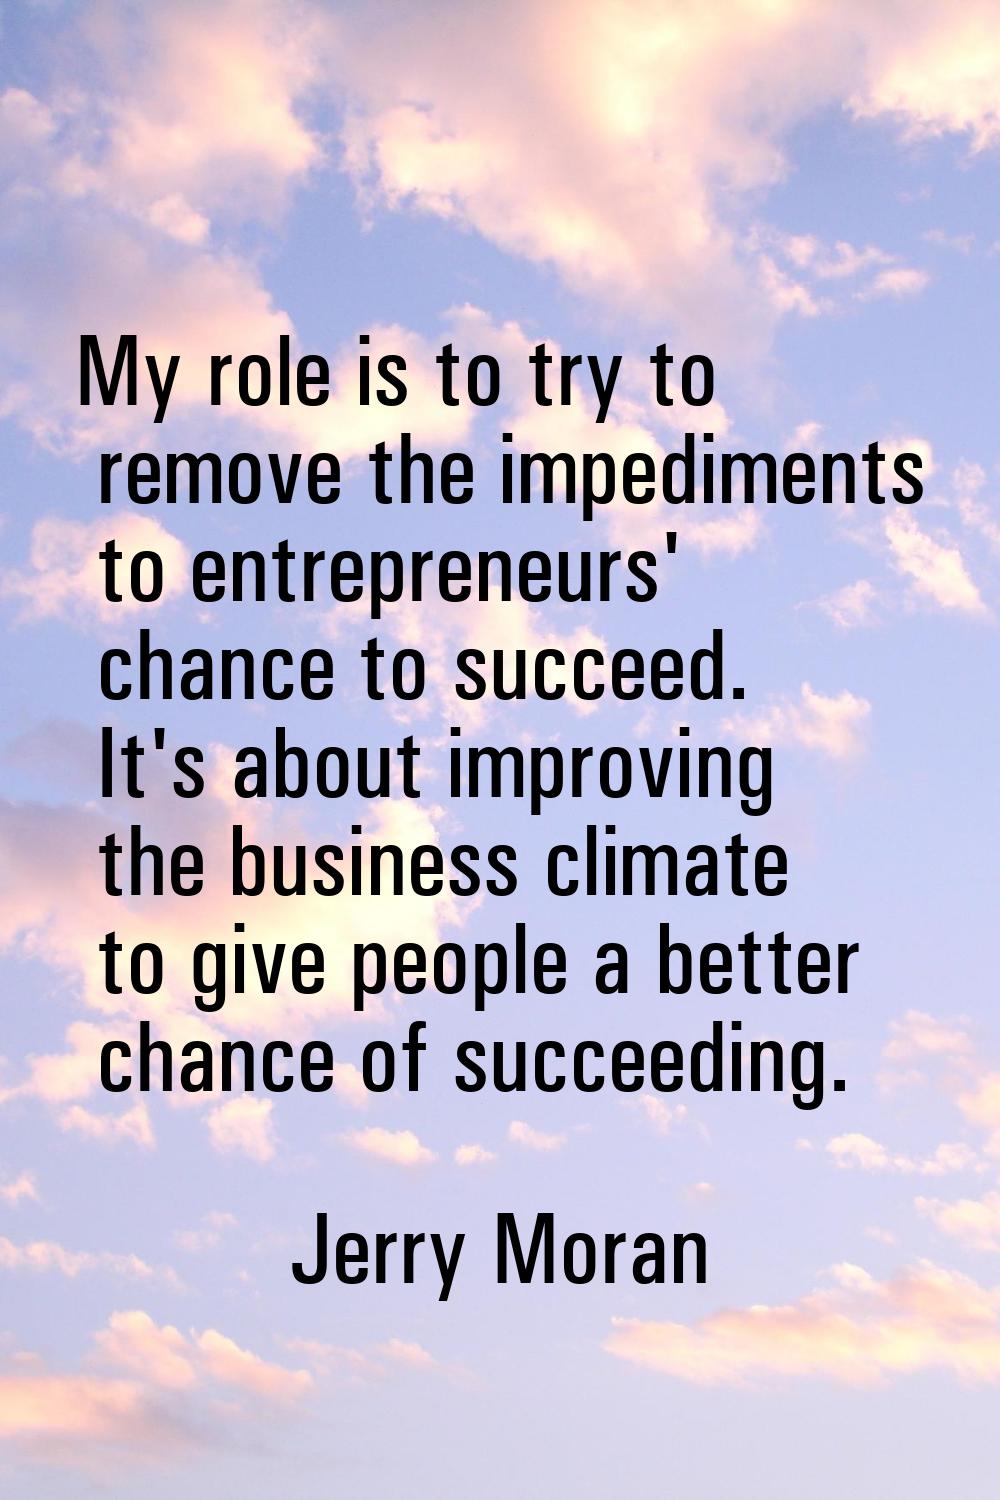 My role is to try to remove the impediments to entrepreneurs' chance to succeed. It's about improvi